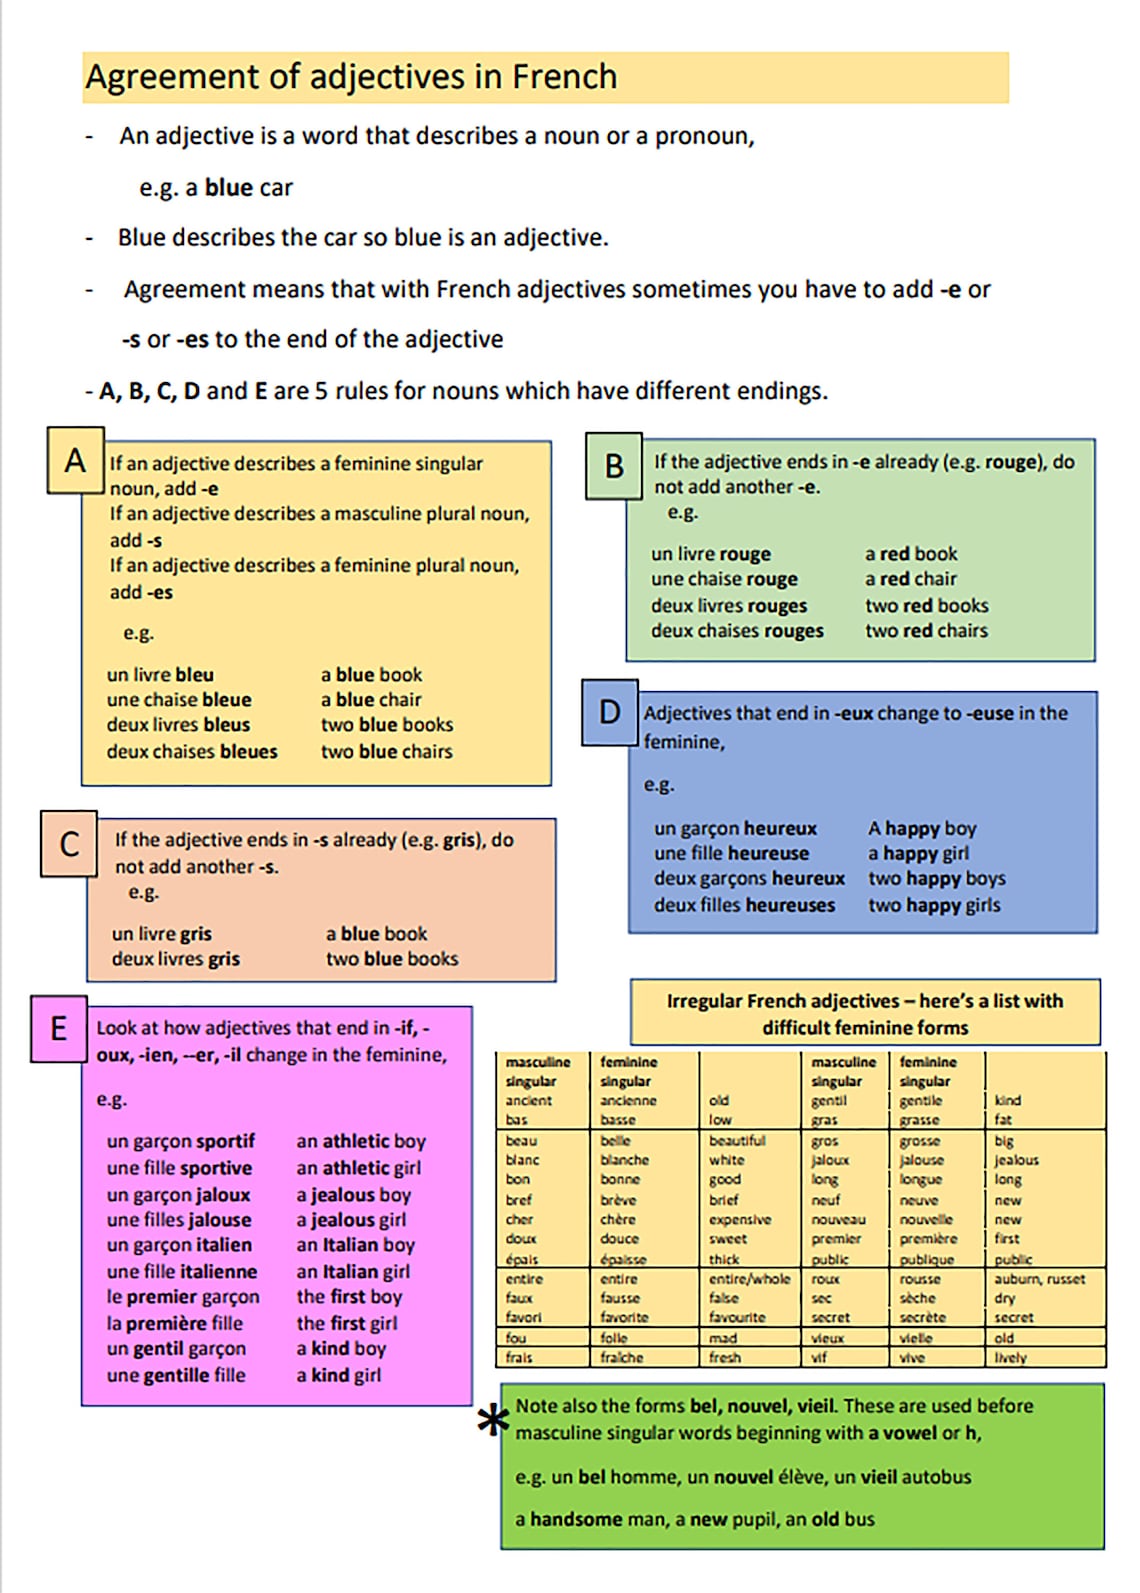 unh-agreement-of-adjectives-spanish-worksheet-id96348-opendata-db-excel